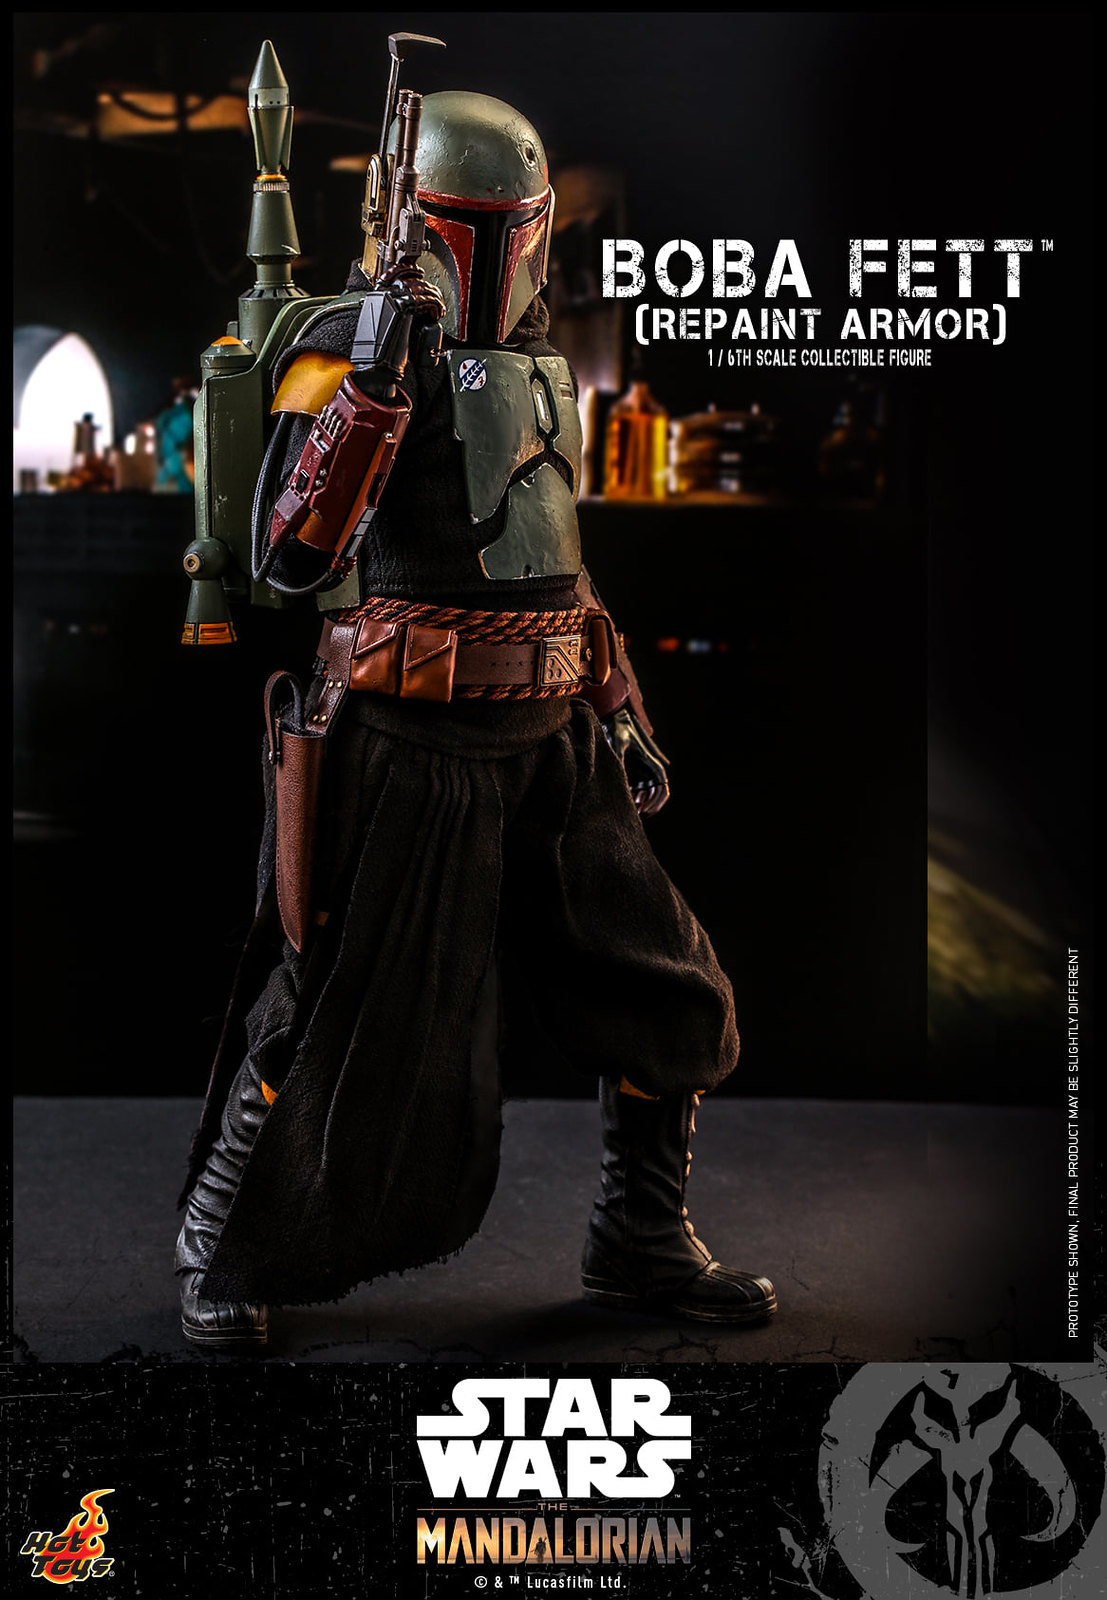 Star Wars: The Mandalorian™ - 1/6th scale Boba Fett™ (Repaint Armor) Collectible figure/ figure and Throne Collectible Set 51312011789_30d06668fa_h